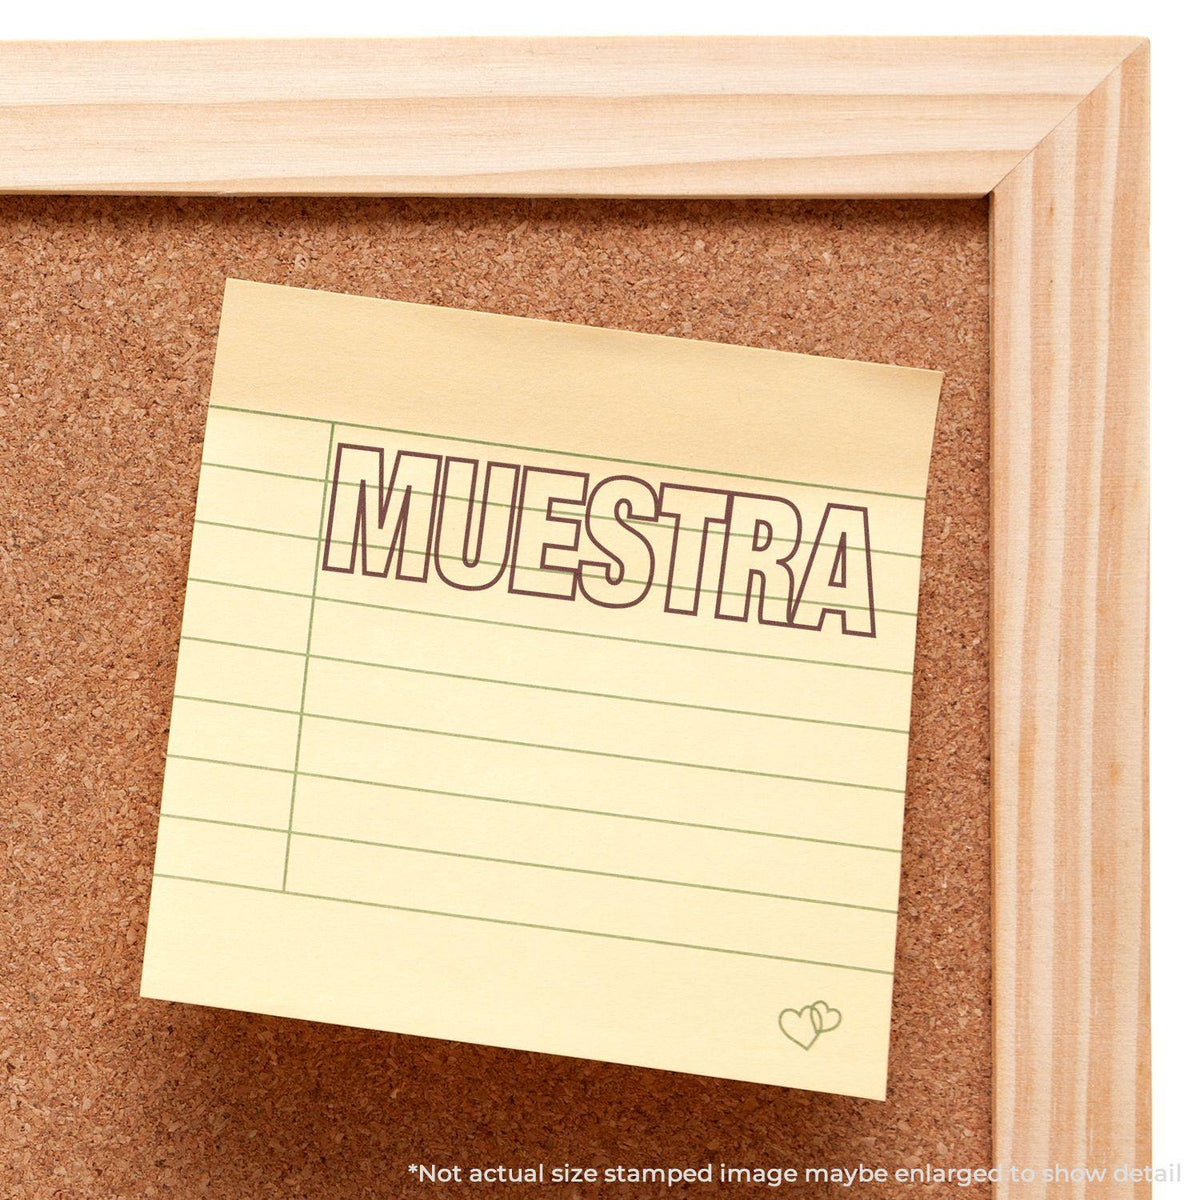 Large Muestra Rubber Stamp In Use Photo